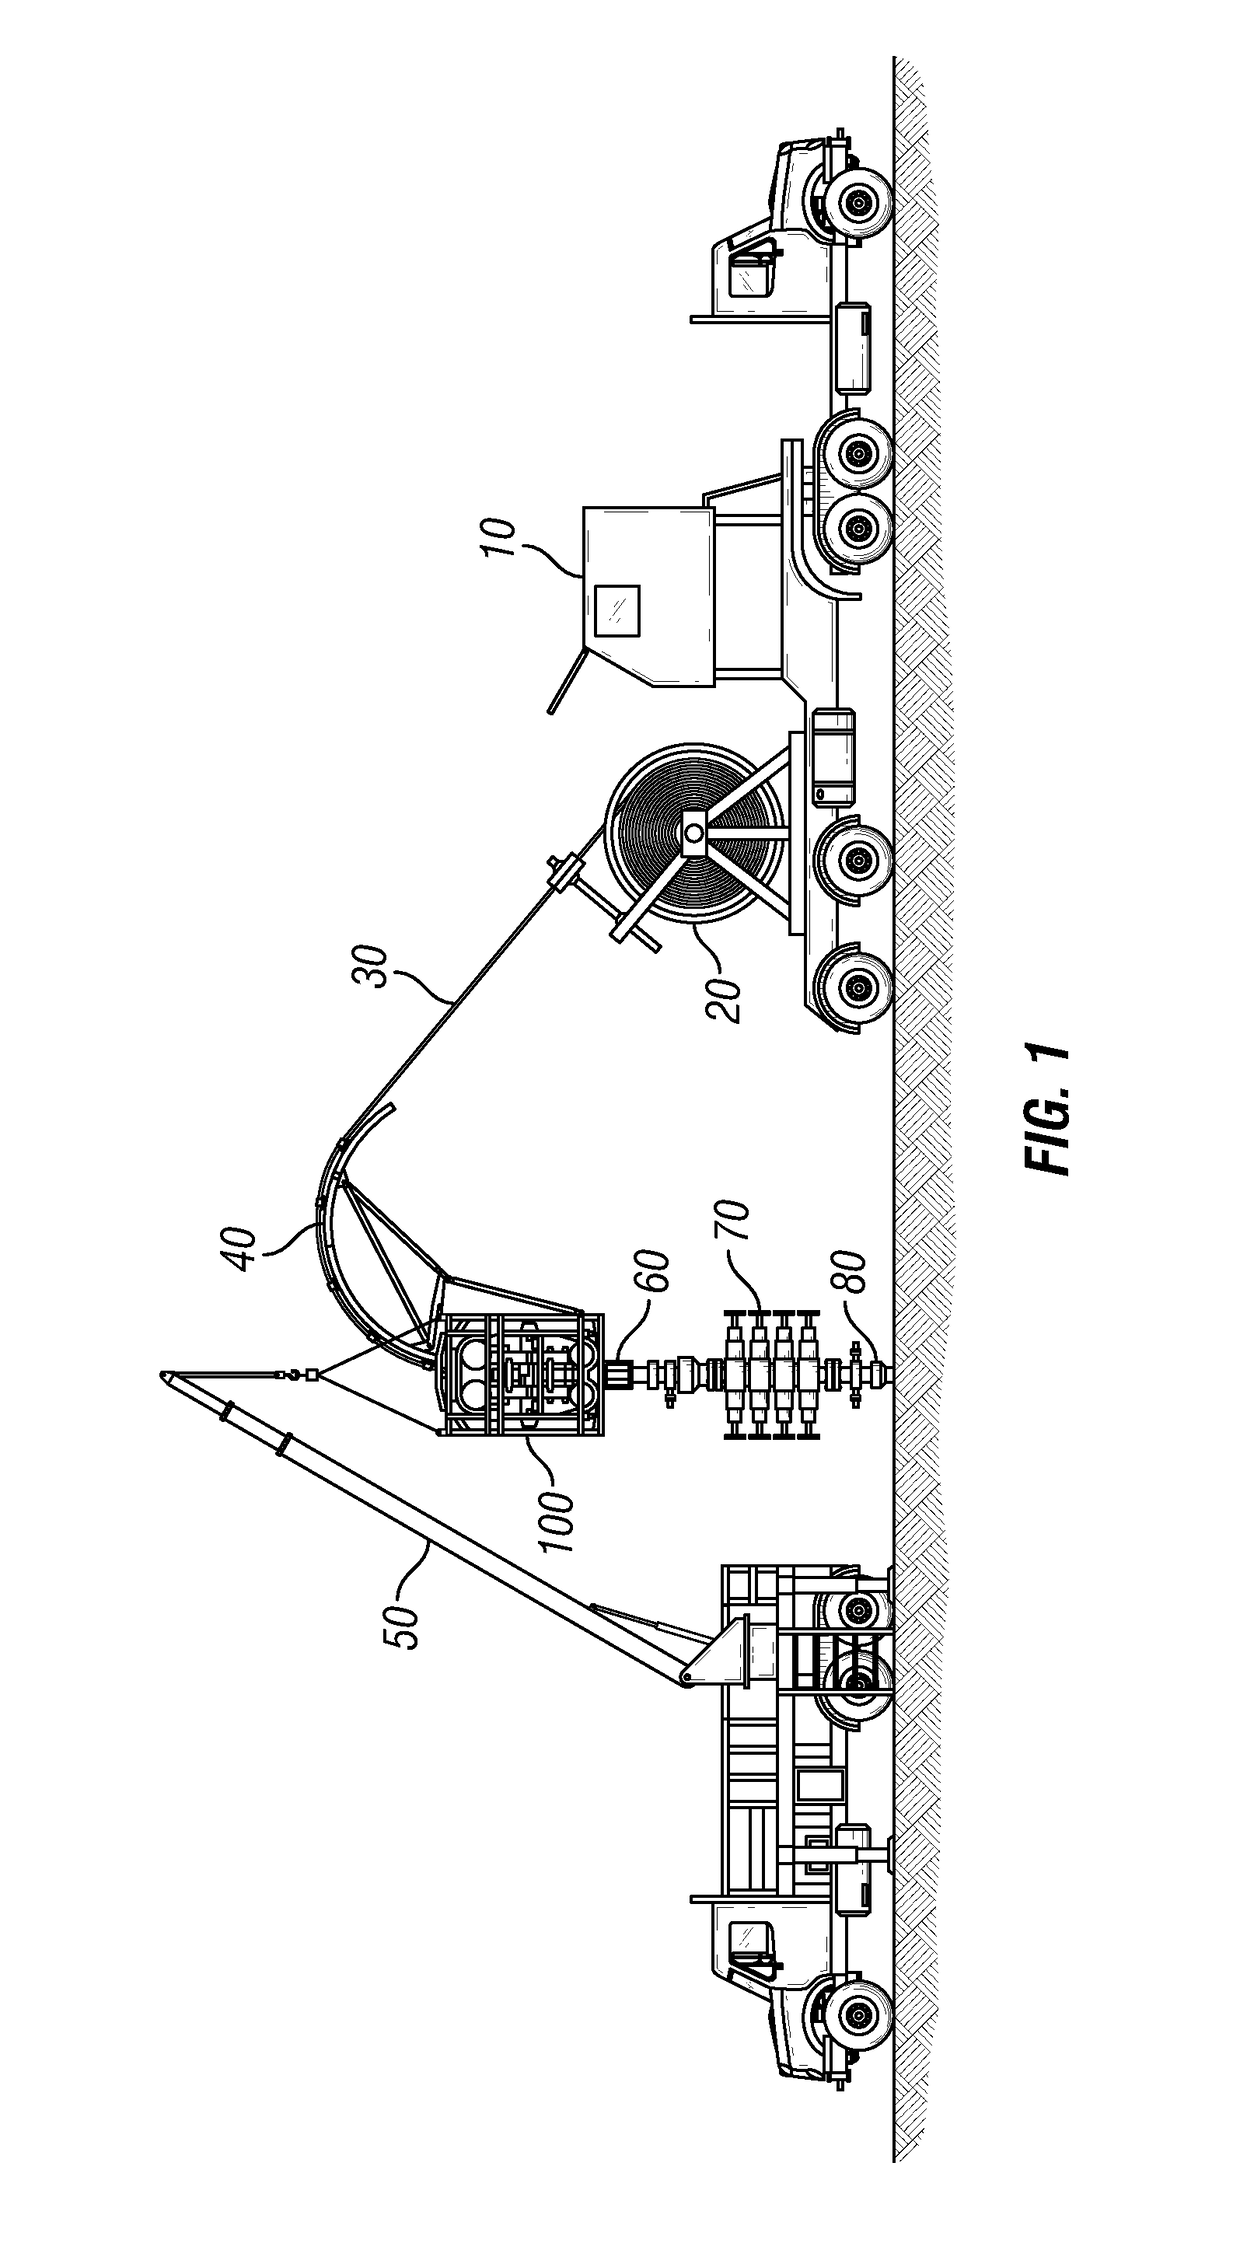 Method for increasing the roughness of injector gripper blocks for coiled tubing operations